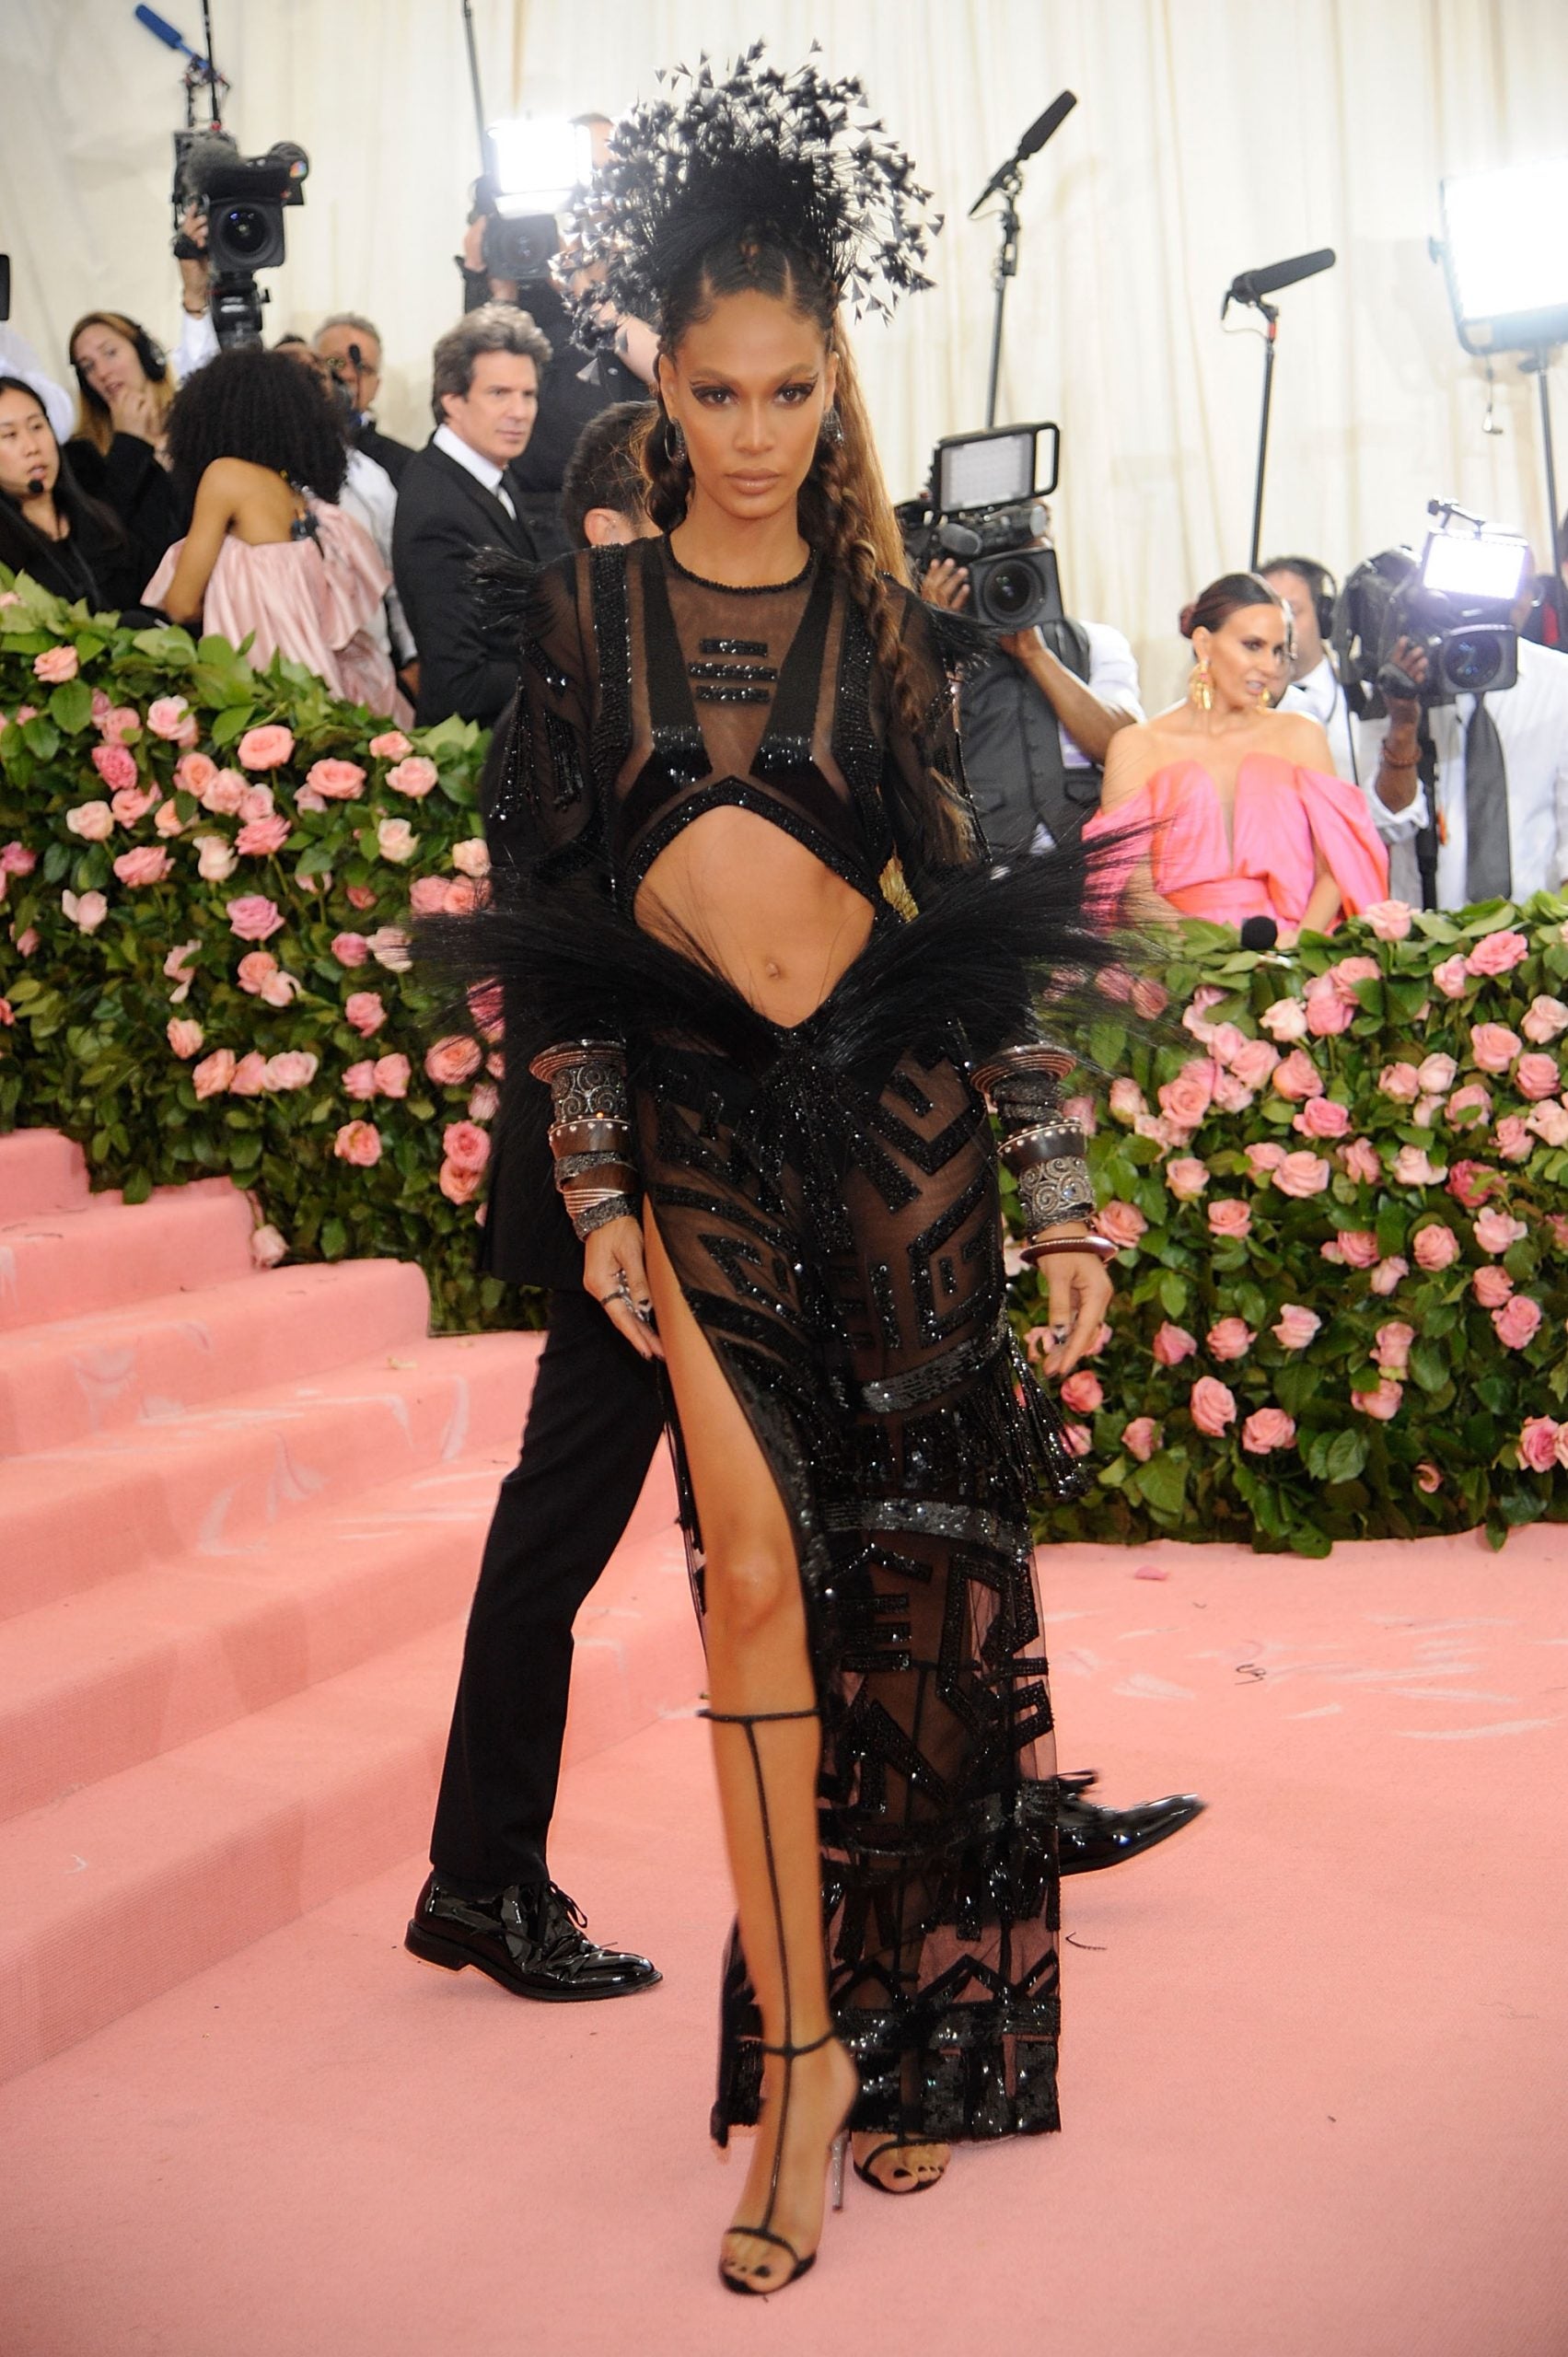 The Met Gala Has Been Postponed Due To COVID-19